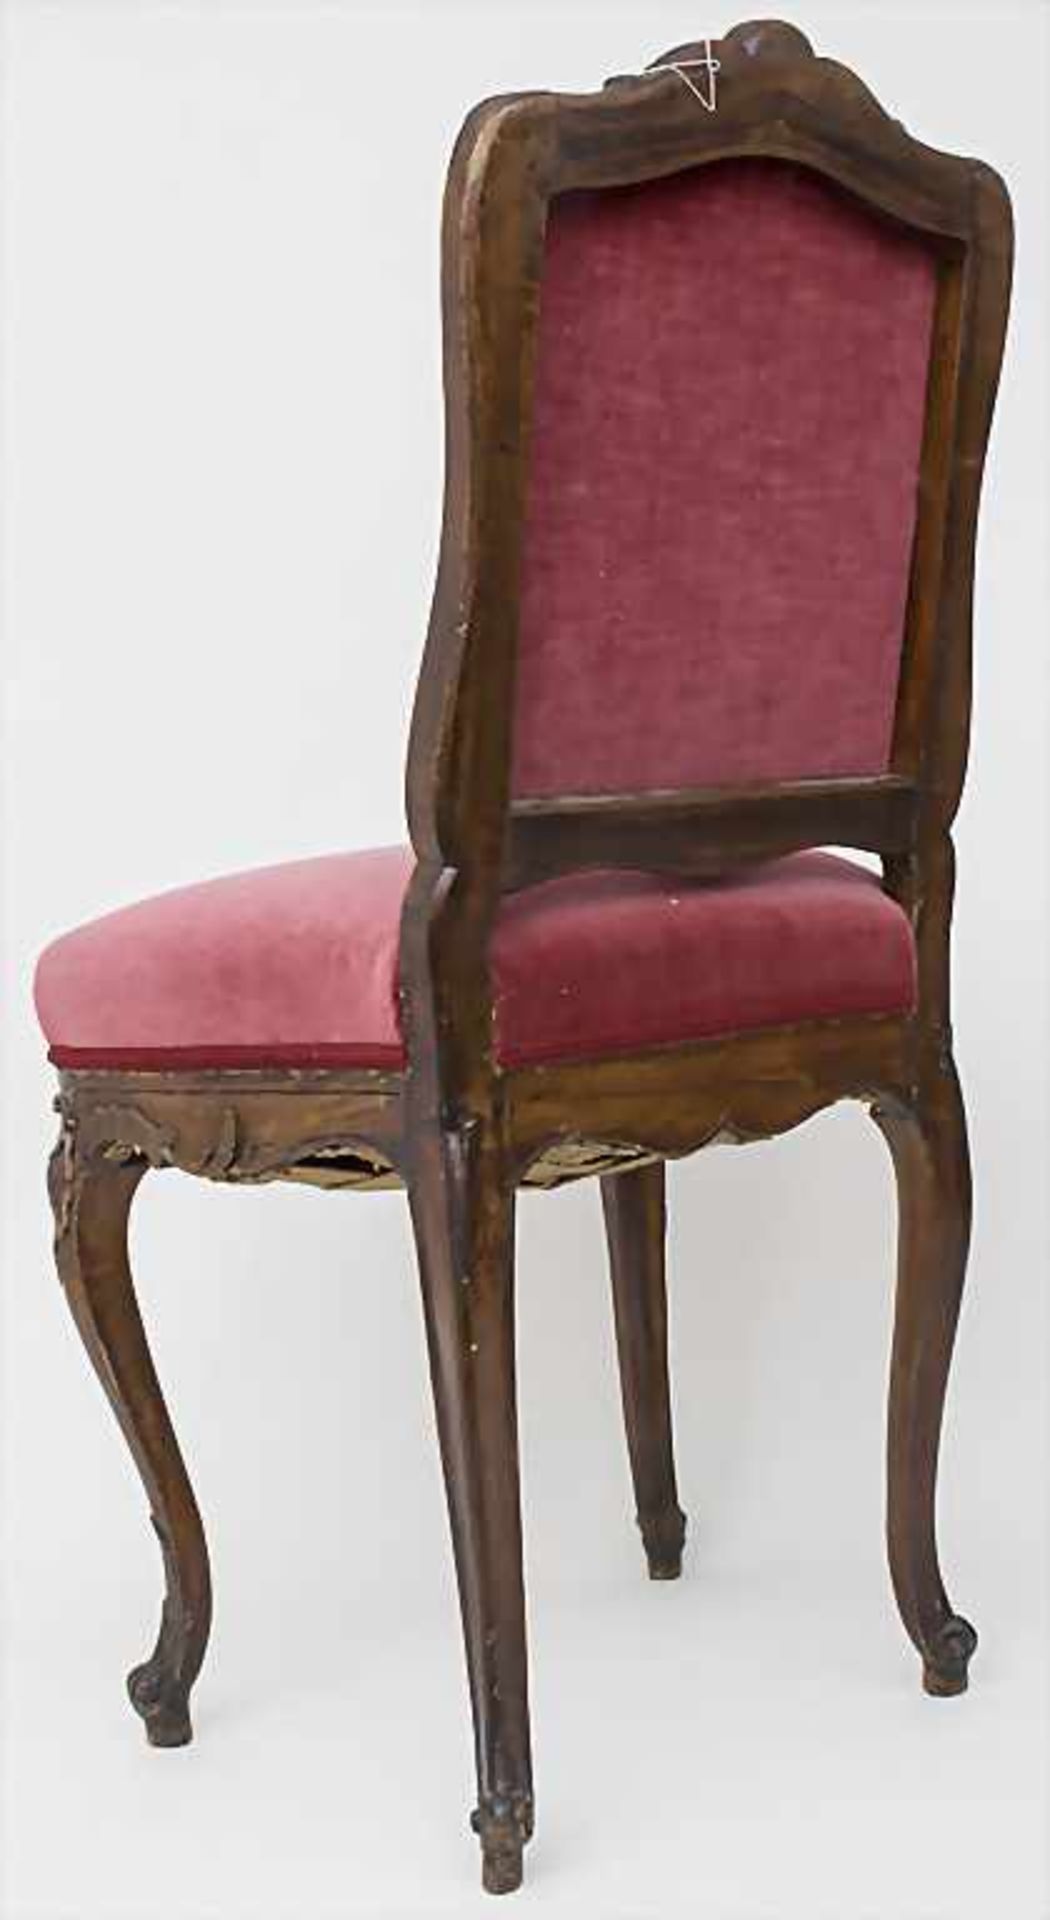 Rokoko--Stuhl mit Rocaillendekor / A Rococo chair with rocailles - Image 3 of 5